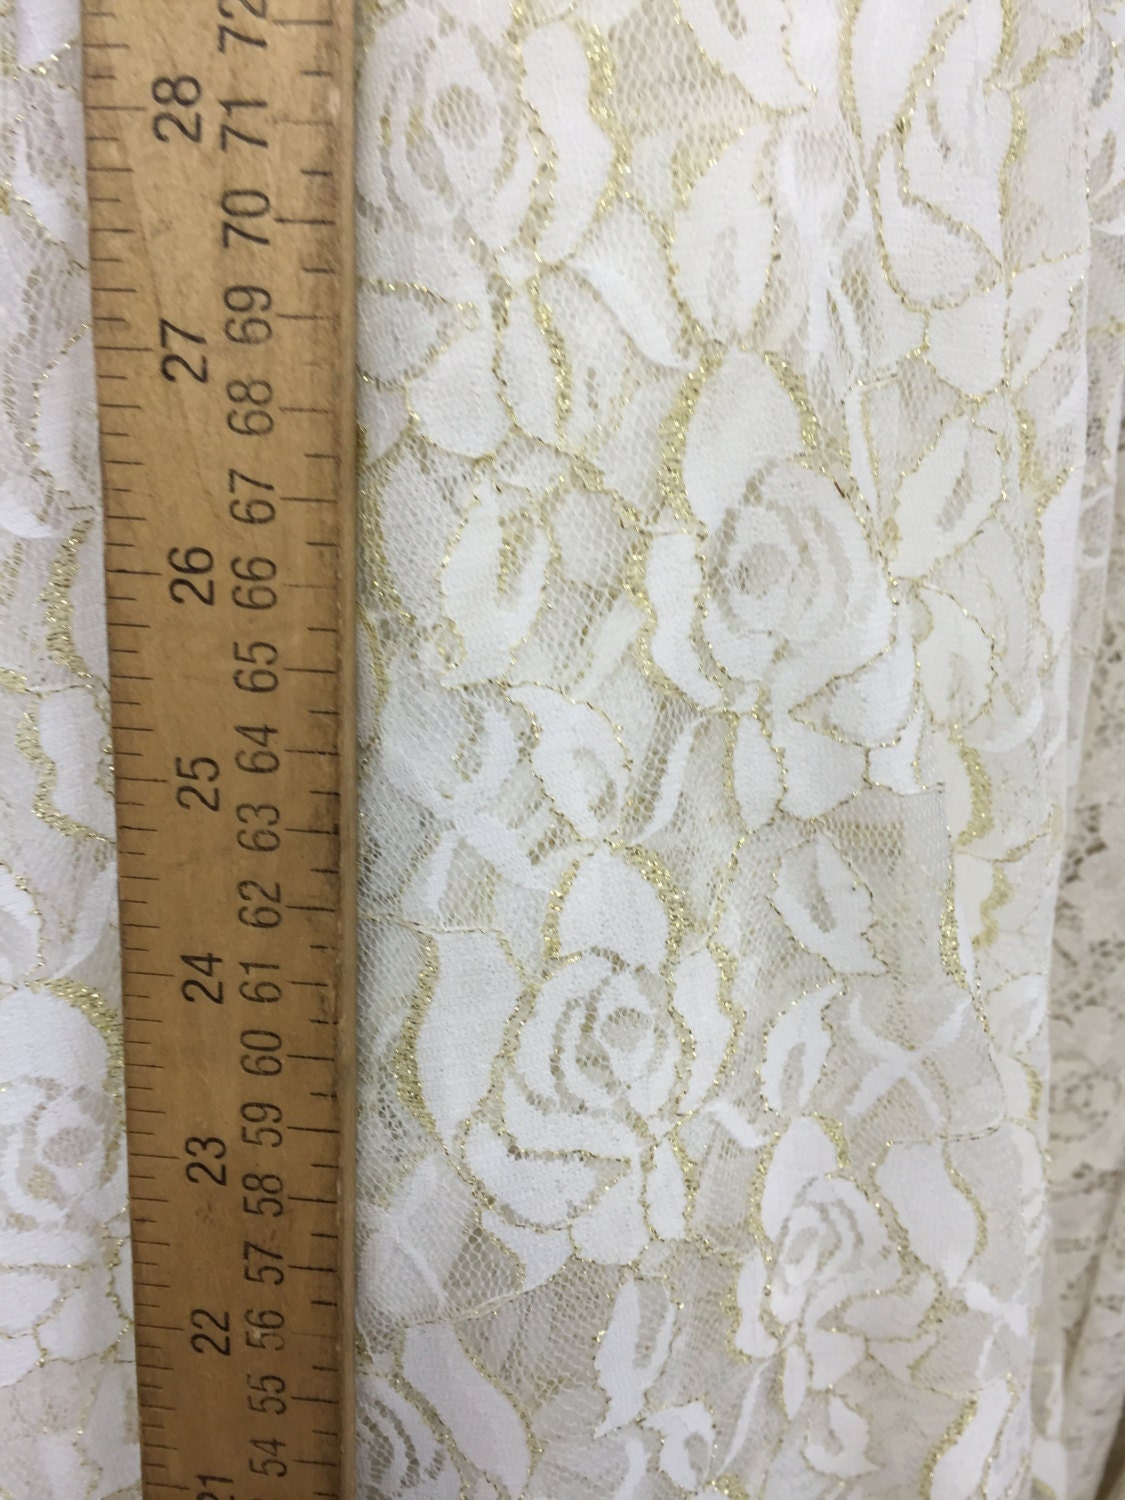 4 Way Stretch Lace Floral Flowers Nylon Spandex Ivory Gold Lace 58-60 in W Fabric Sold by the Yard Soft Stretch Floral Draping